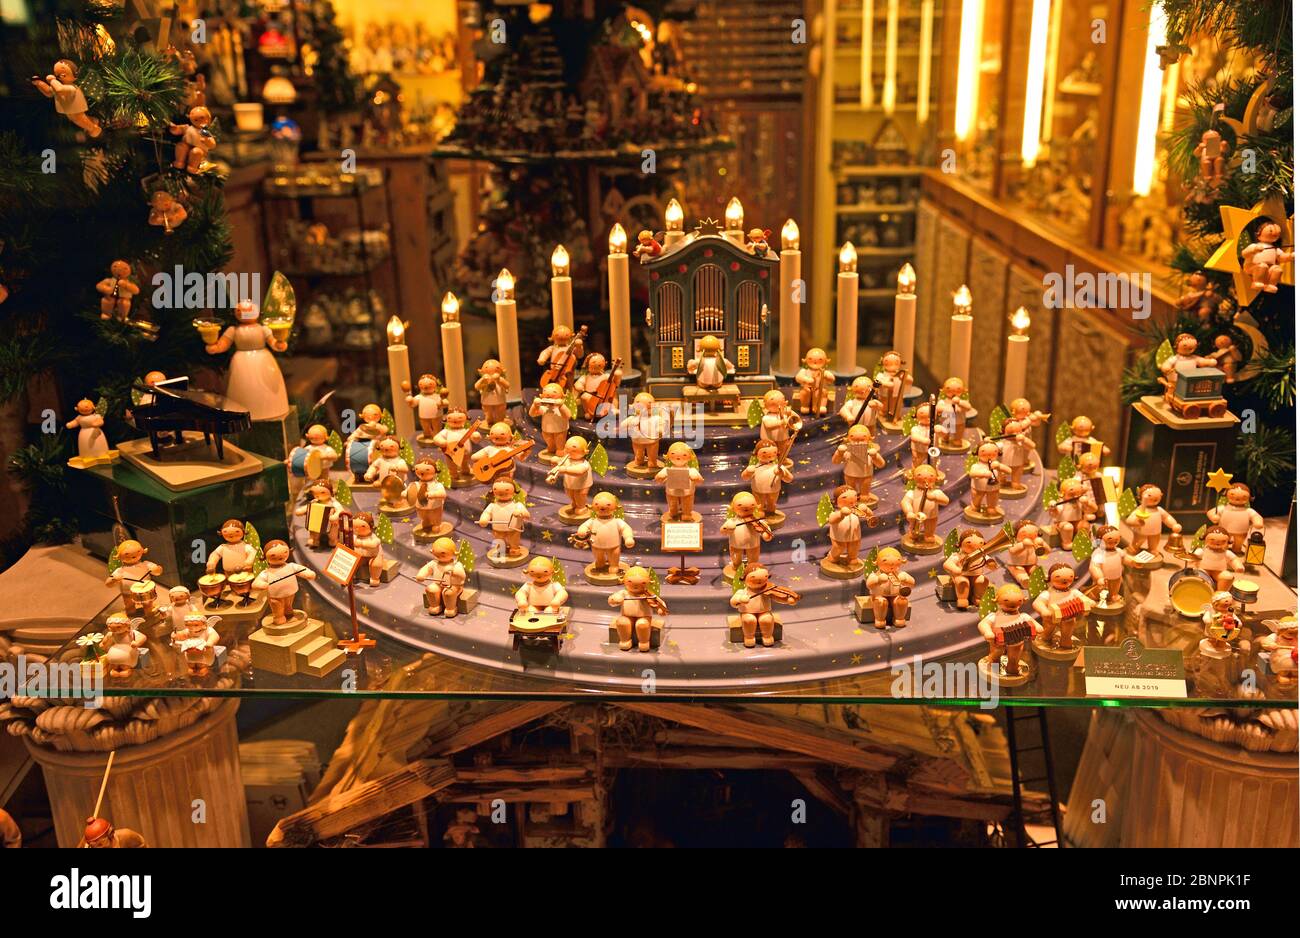 Europe, Germany, Bavaria, Munich, City, shop window gifts Kaiser from 1874, at the Old Peter, Christmas decorations, wooden figures, Stock Photo